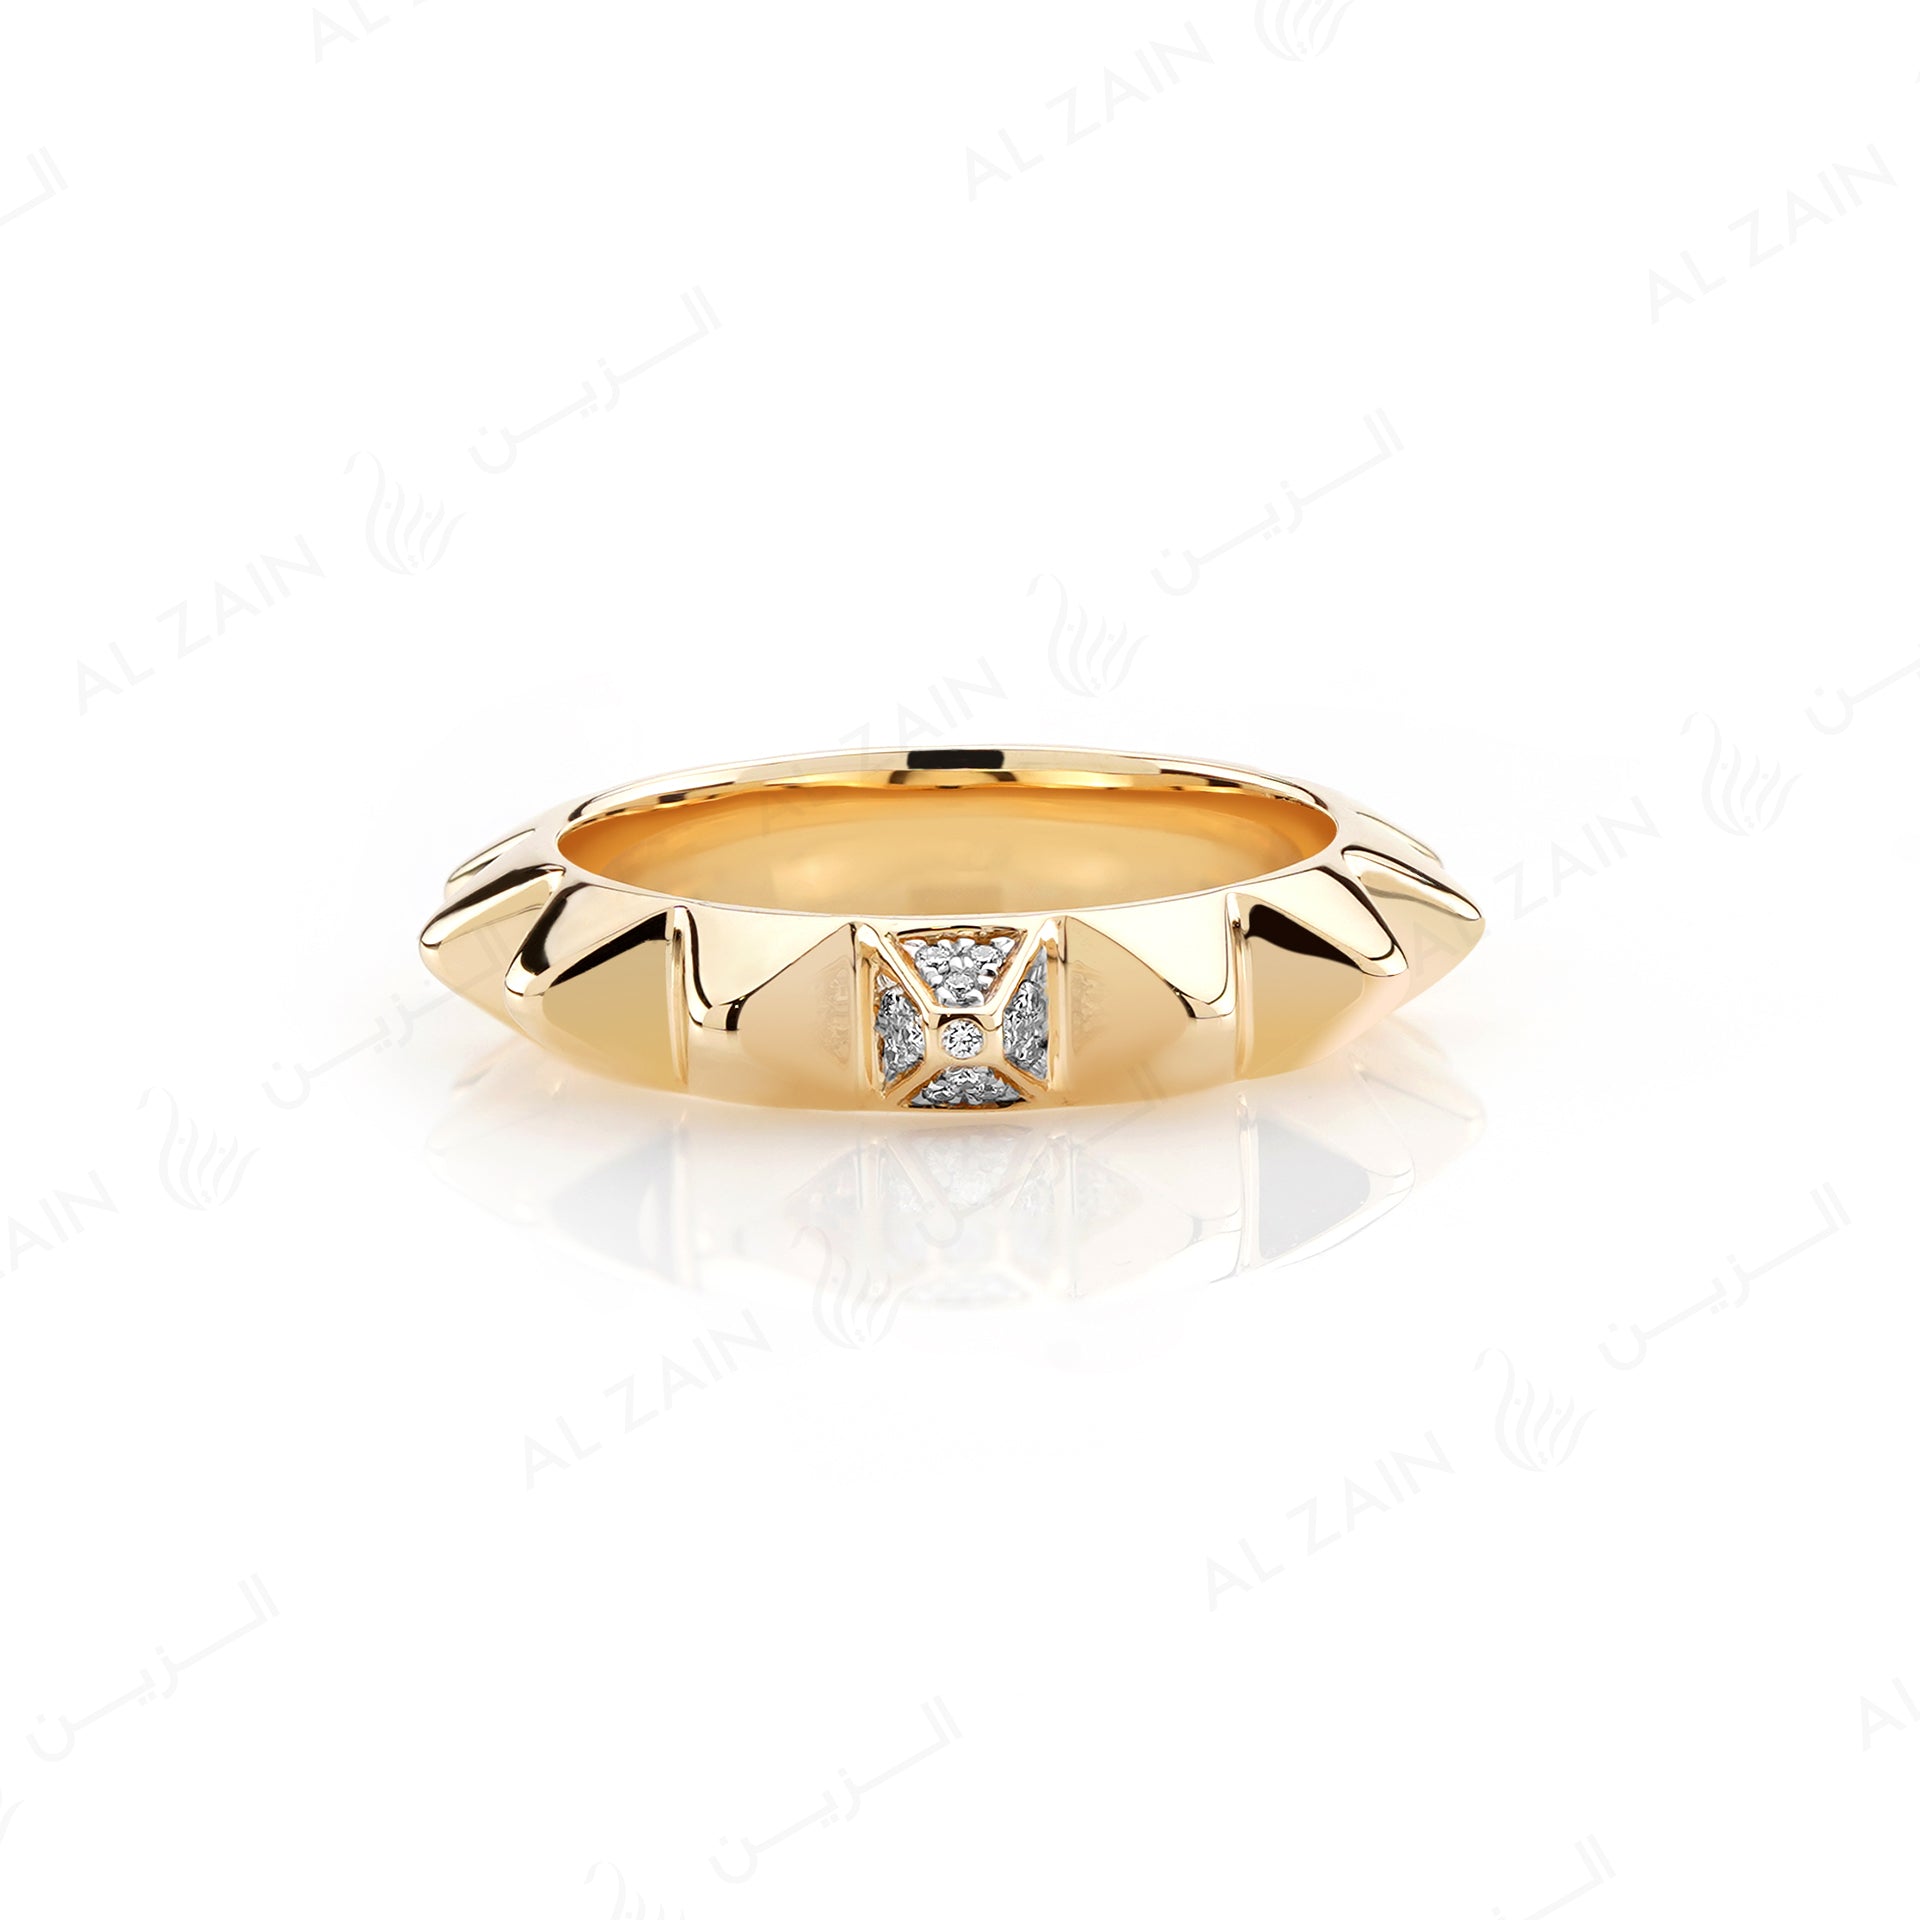 Hab El Hayl 2nd Edition Ring in Yellow Gold with Diamonds